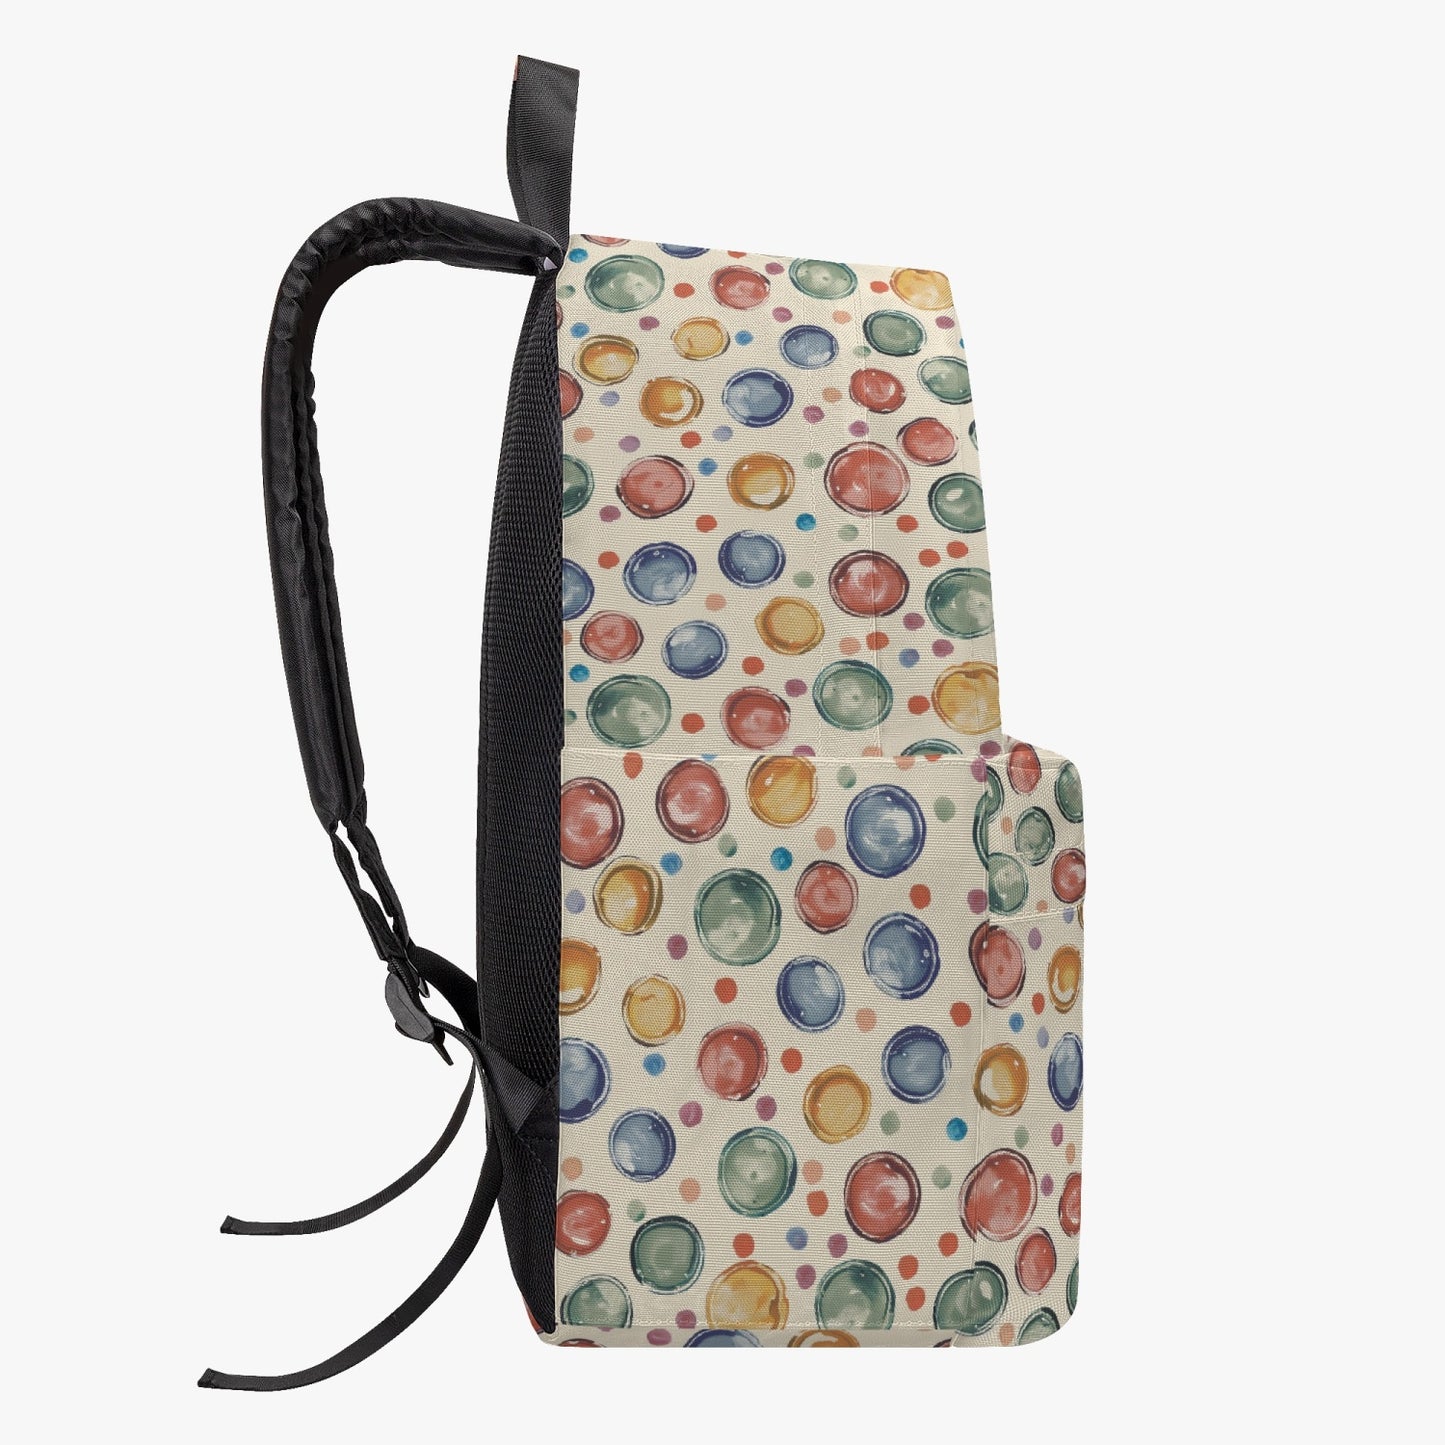 Inspired by Emma Bridgewater  Canvas Backpack